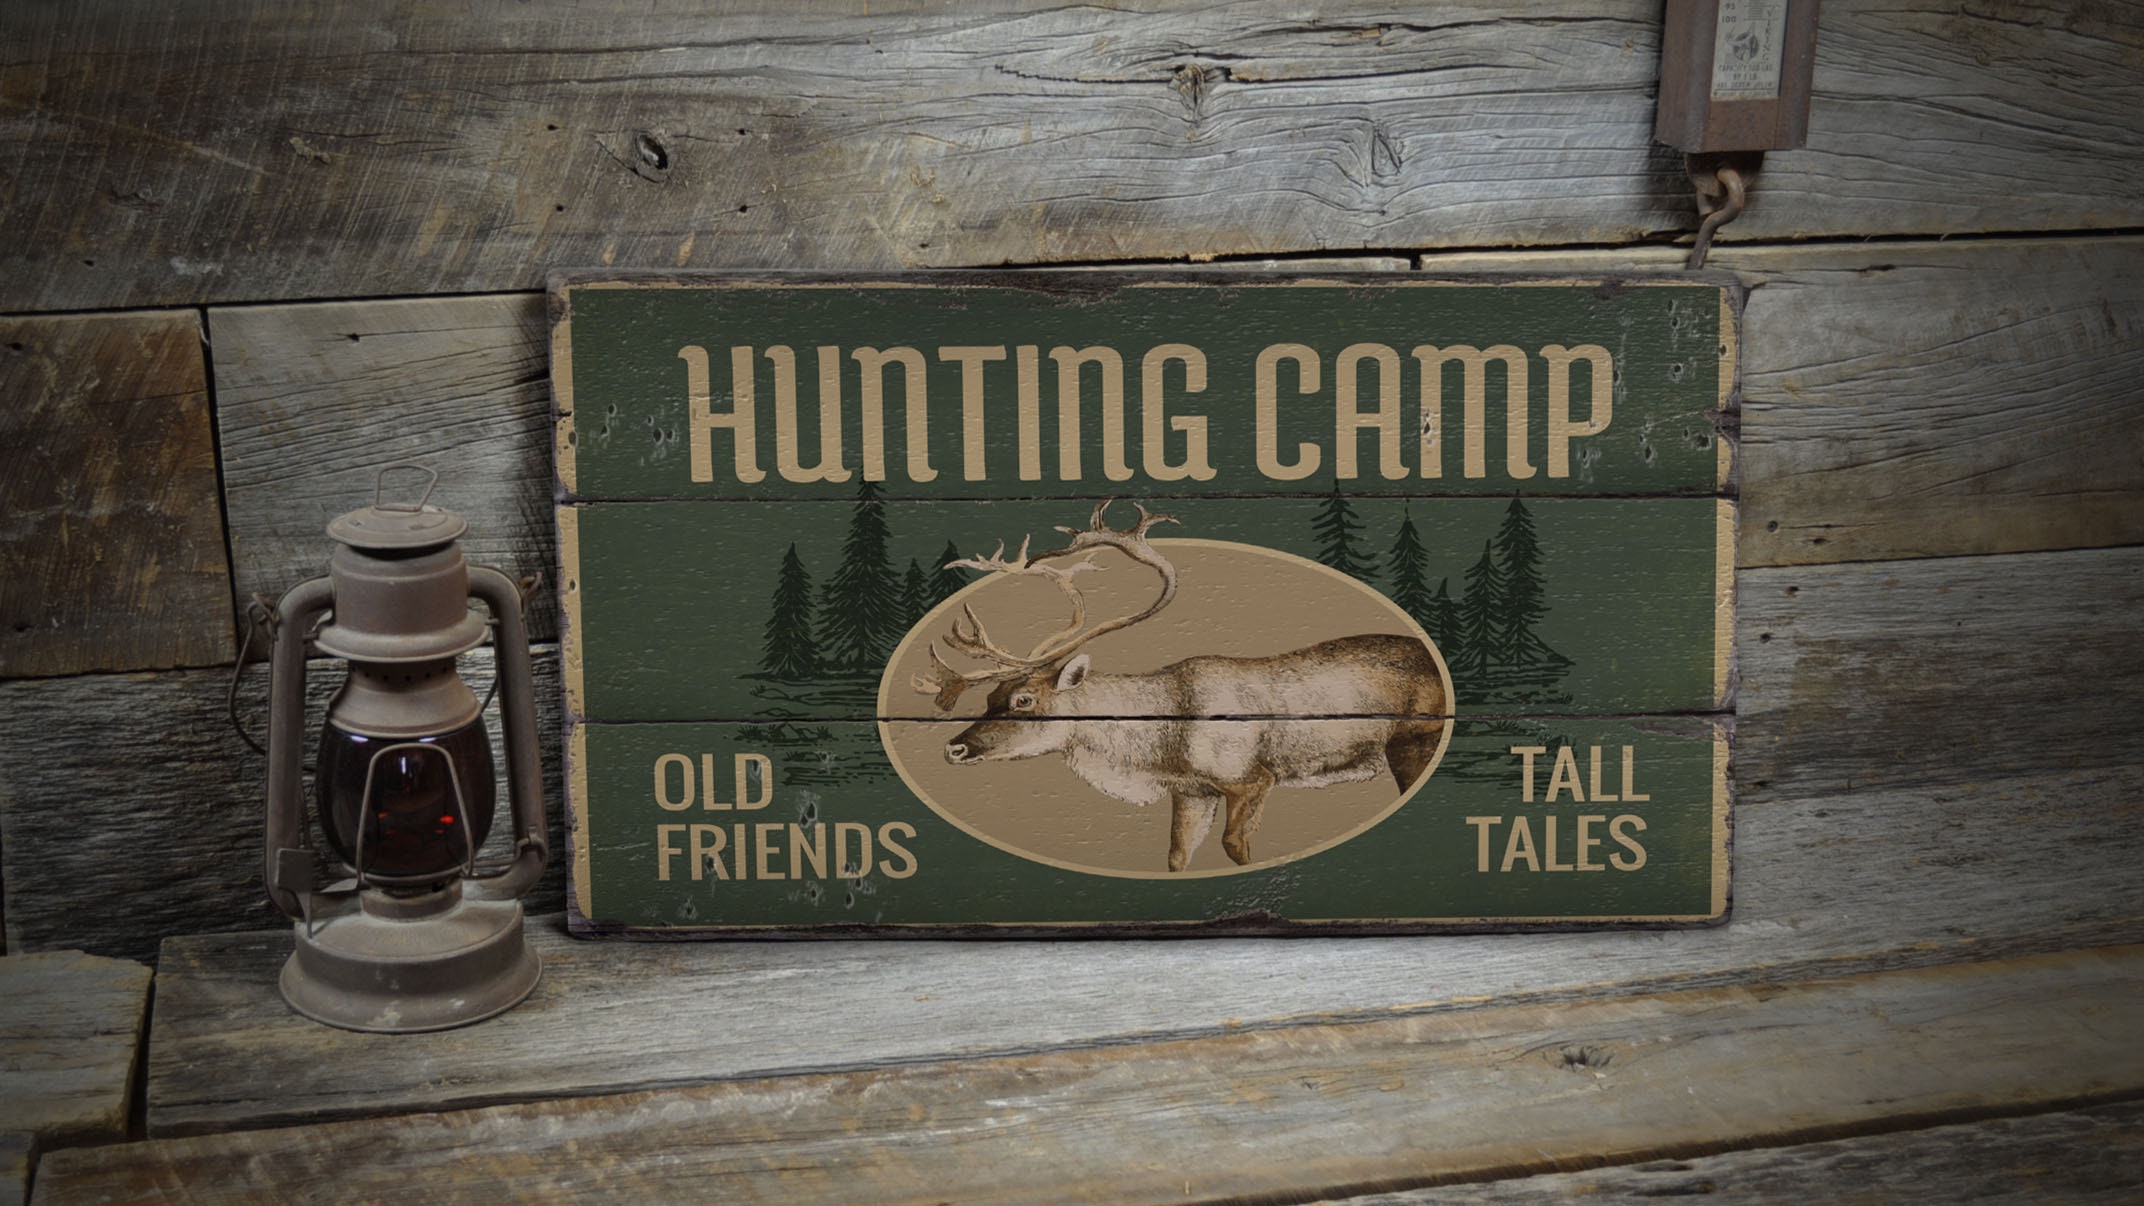 Hunting Camp Sign, Camp and Hunt Sign, Hunting Wildlife, Wildlife Decor,  Wood Cabin Decor, Wooden Lodge Decor Wooden Old Signs Decor -  Canada